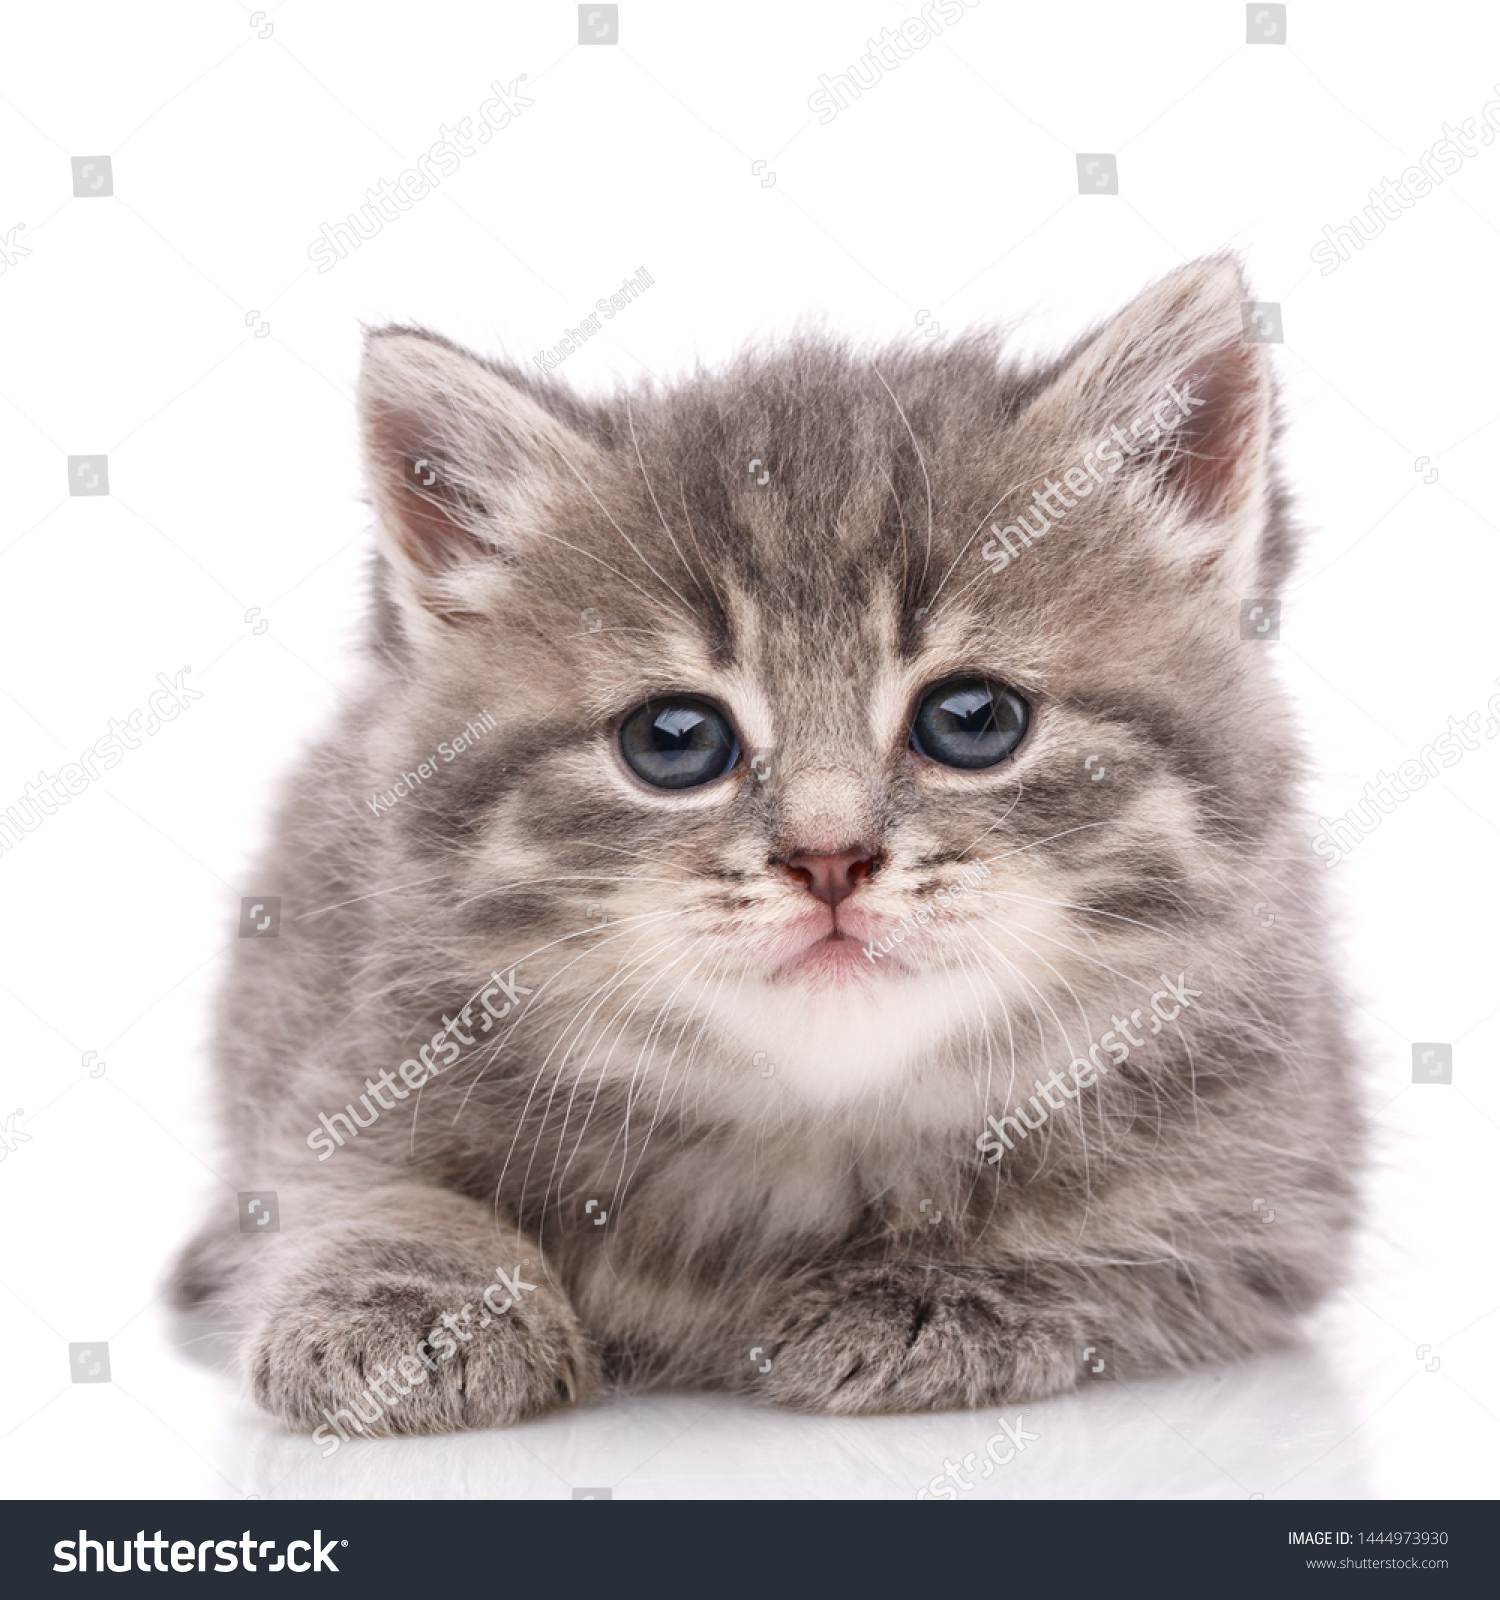 Happy kitten looking at camera. Isolated on white background #1444973930